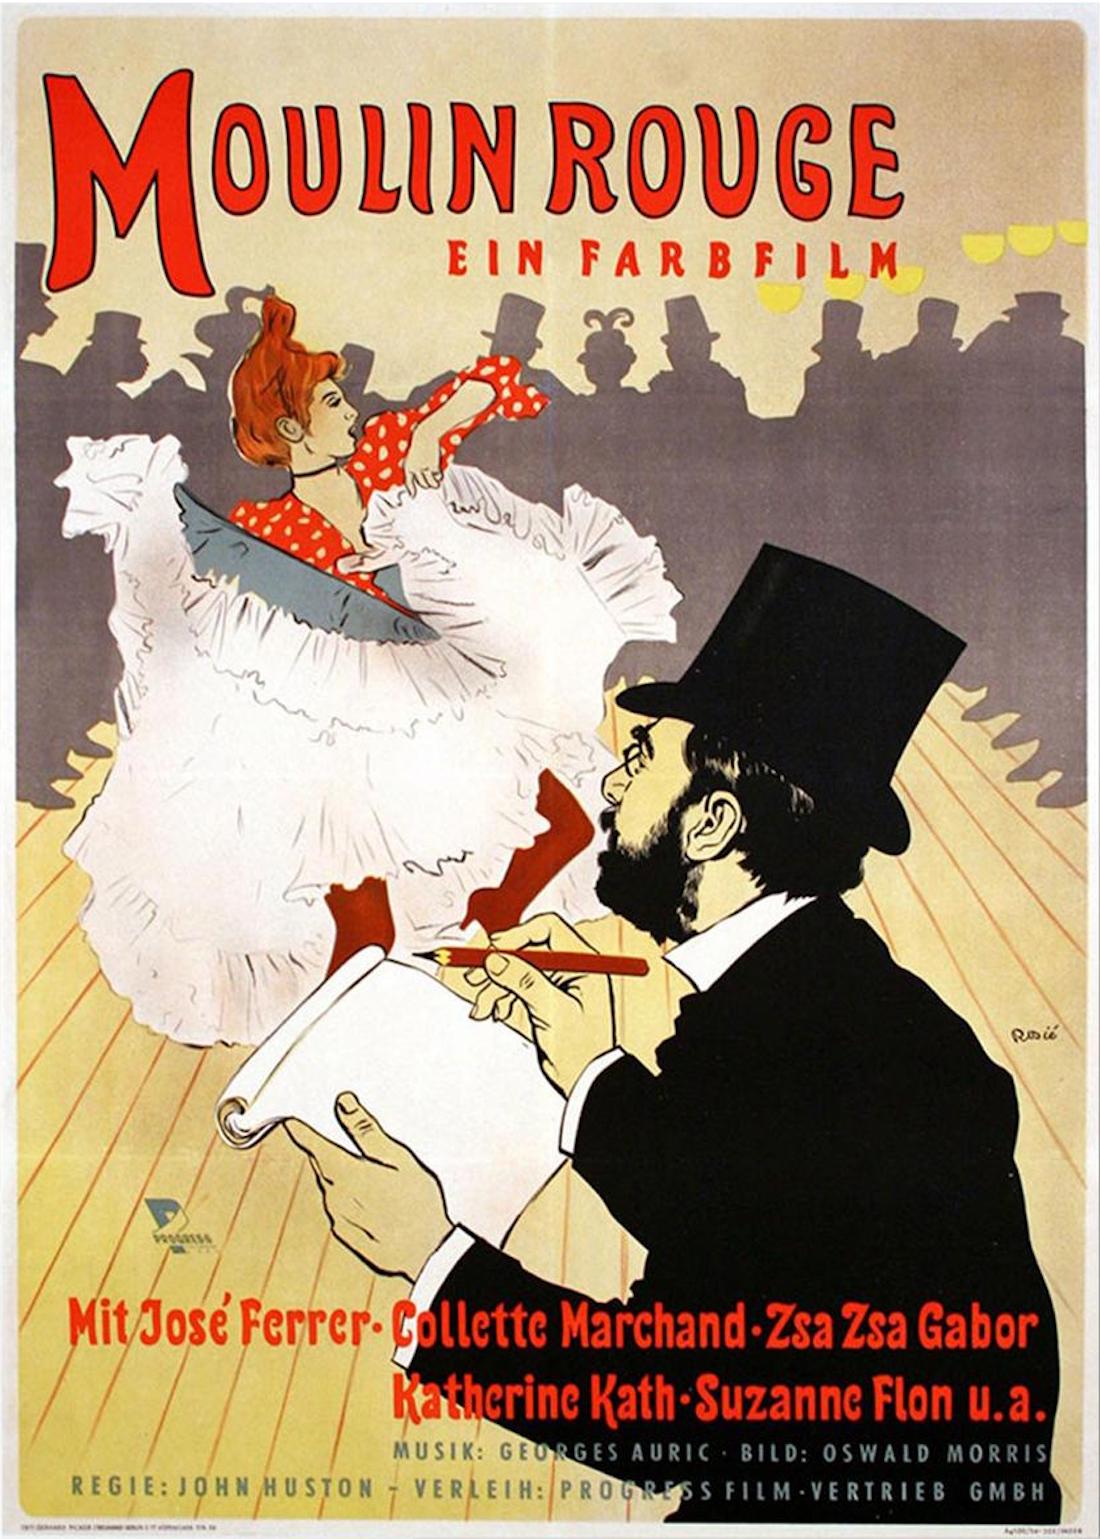 German movie poster for the 1952 release of John Huston's Moulin Rouge, an illustration of a man in a suit and top hat drawing a can can dancer, done in the style of artist Henri de Toulouse-Lautrec